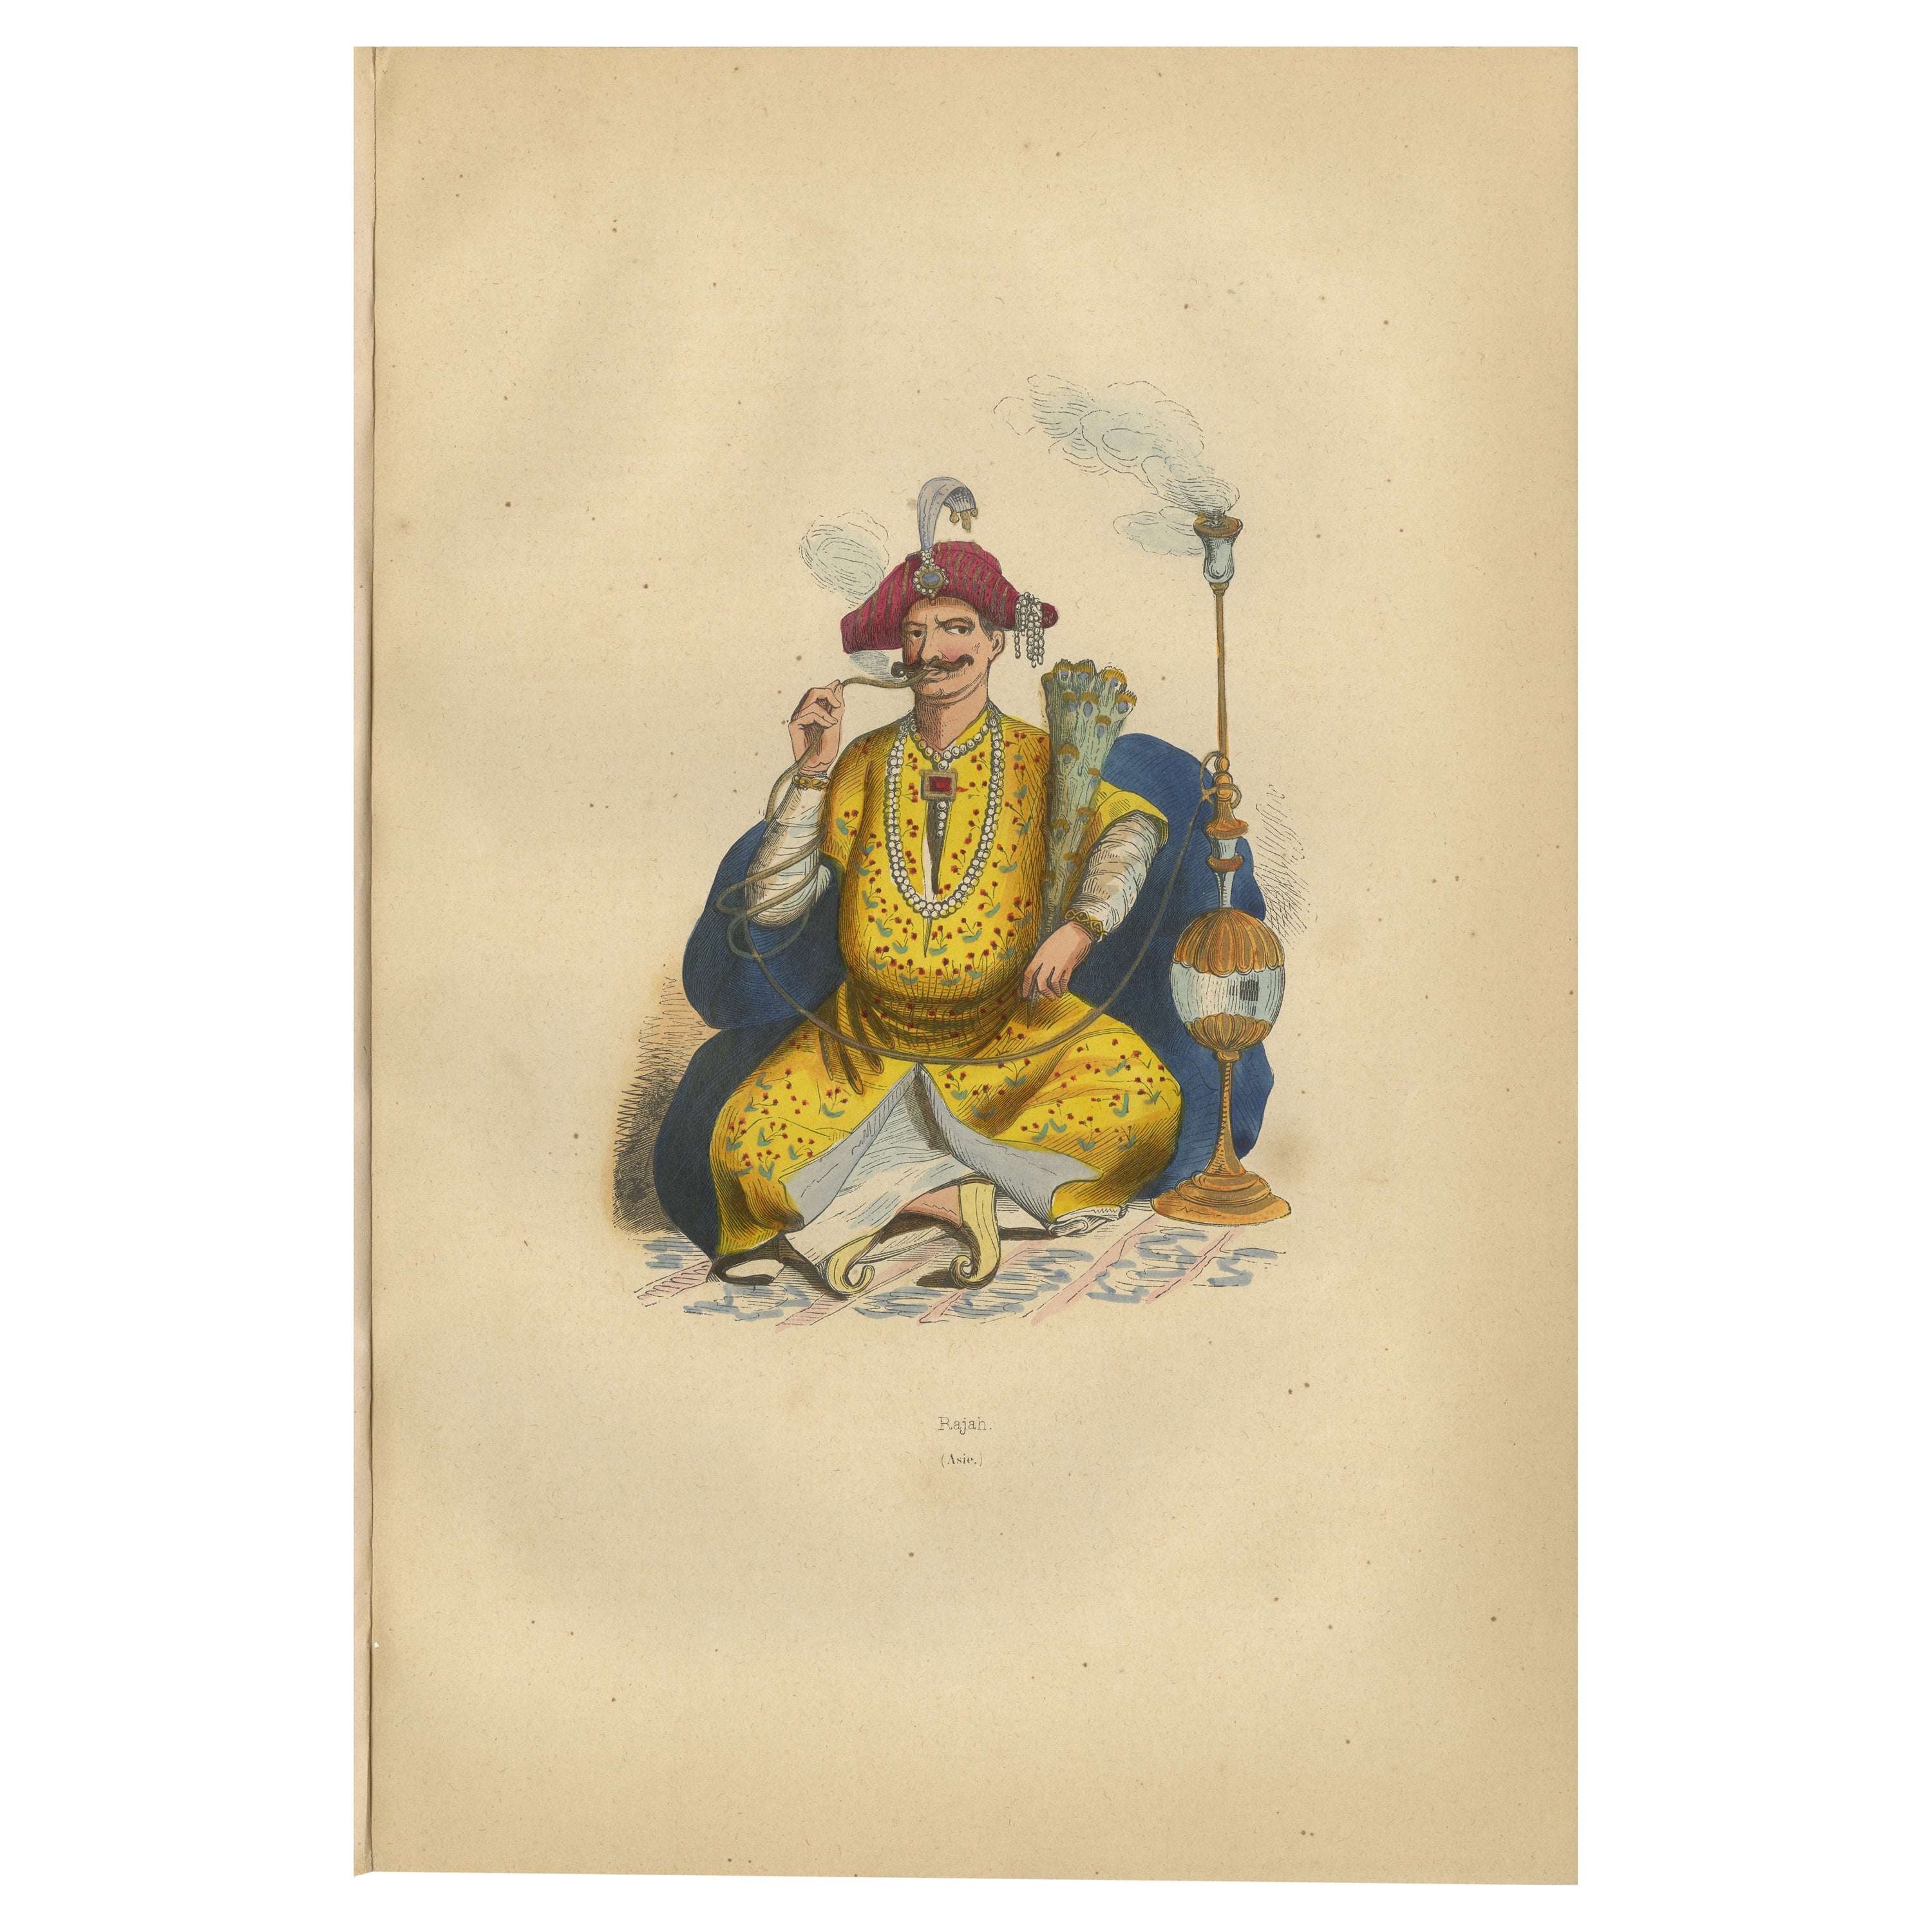 Antique Print of a Rajah by Wahlen '1843'